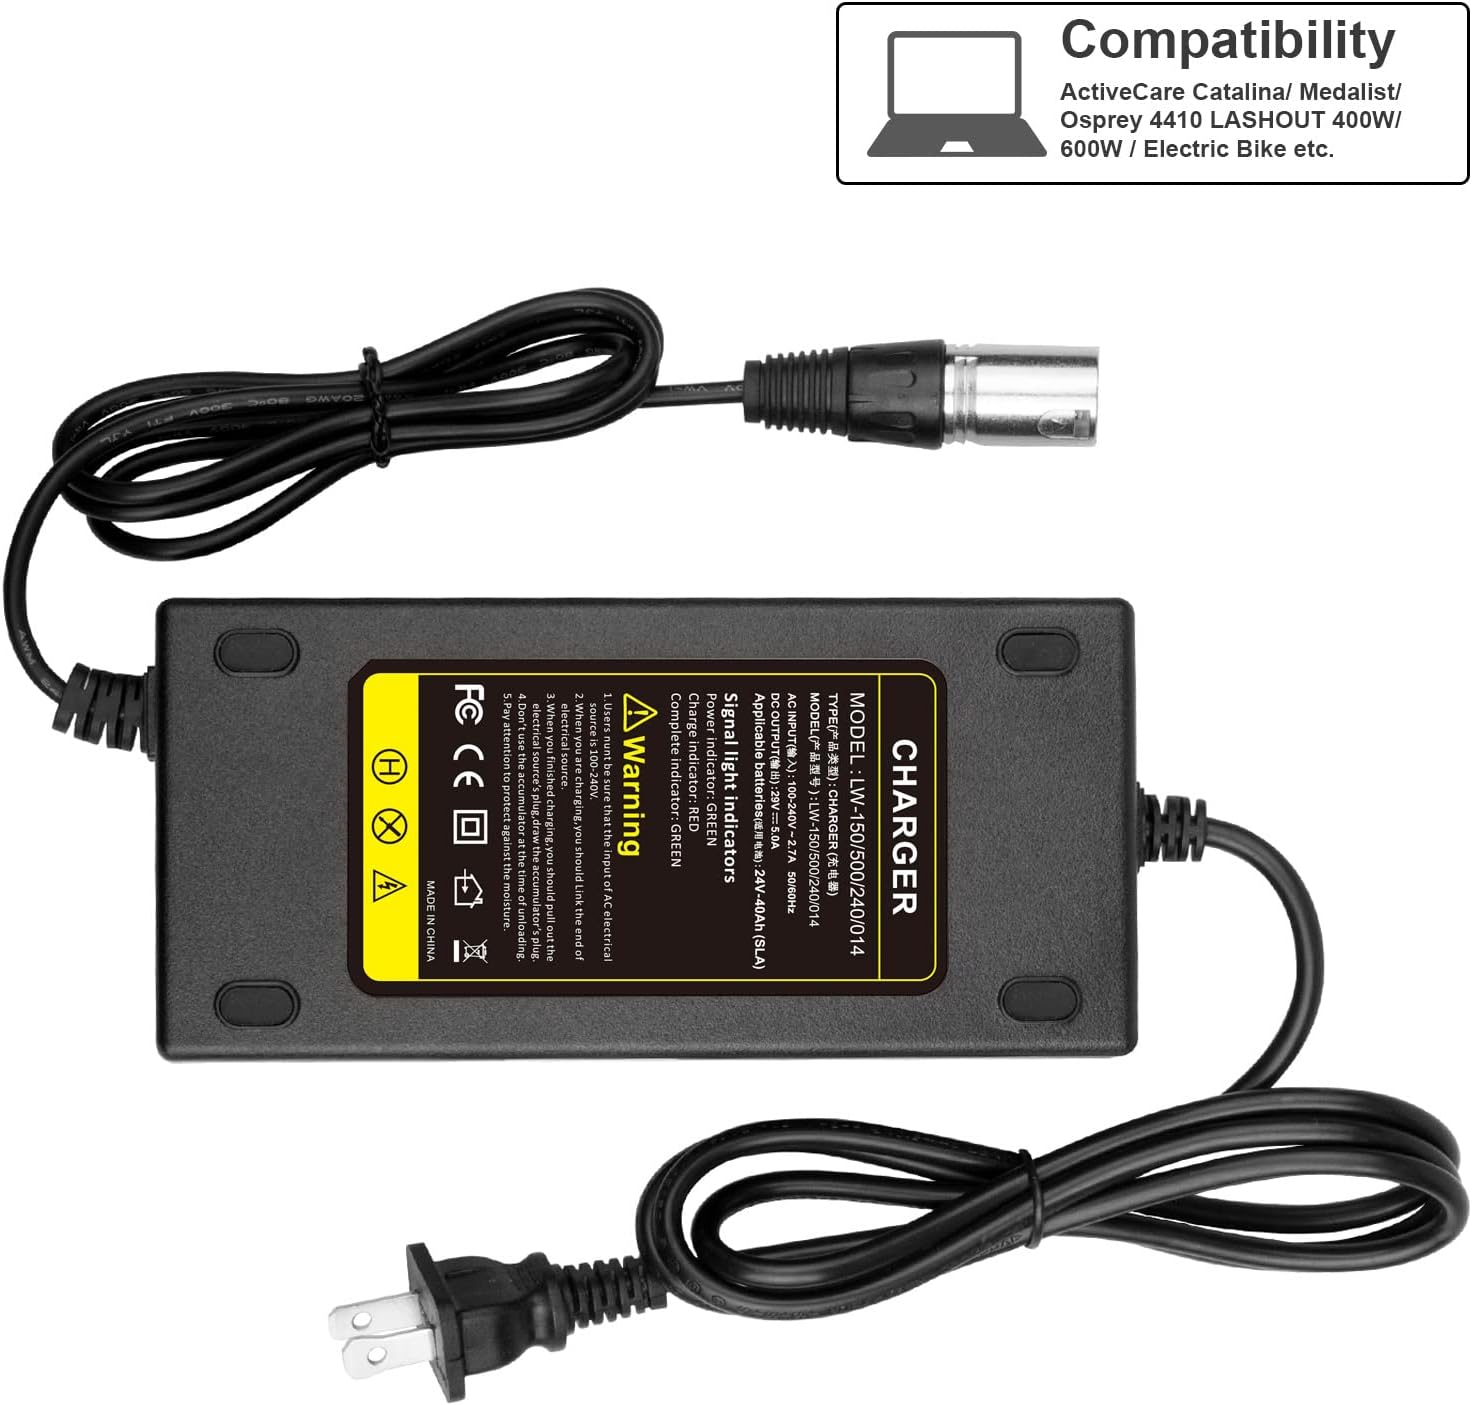 New 24V 5A Battery Charger for Electric Bike, Wheelchair, Mobility EA1065, S150 180 X-CEL, Jazzy 1107,1121, 1121 HD, 614 - Click Image to Close